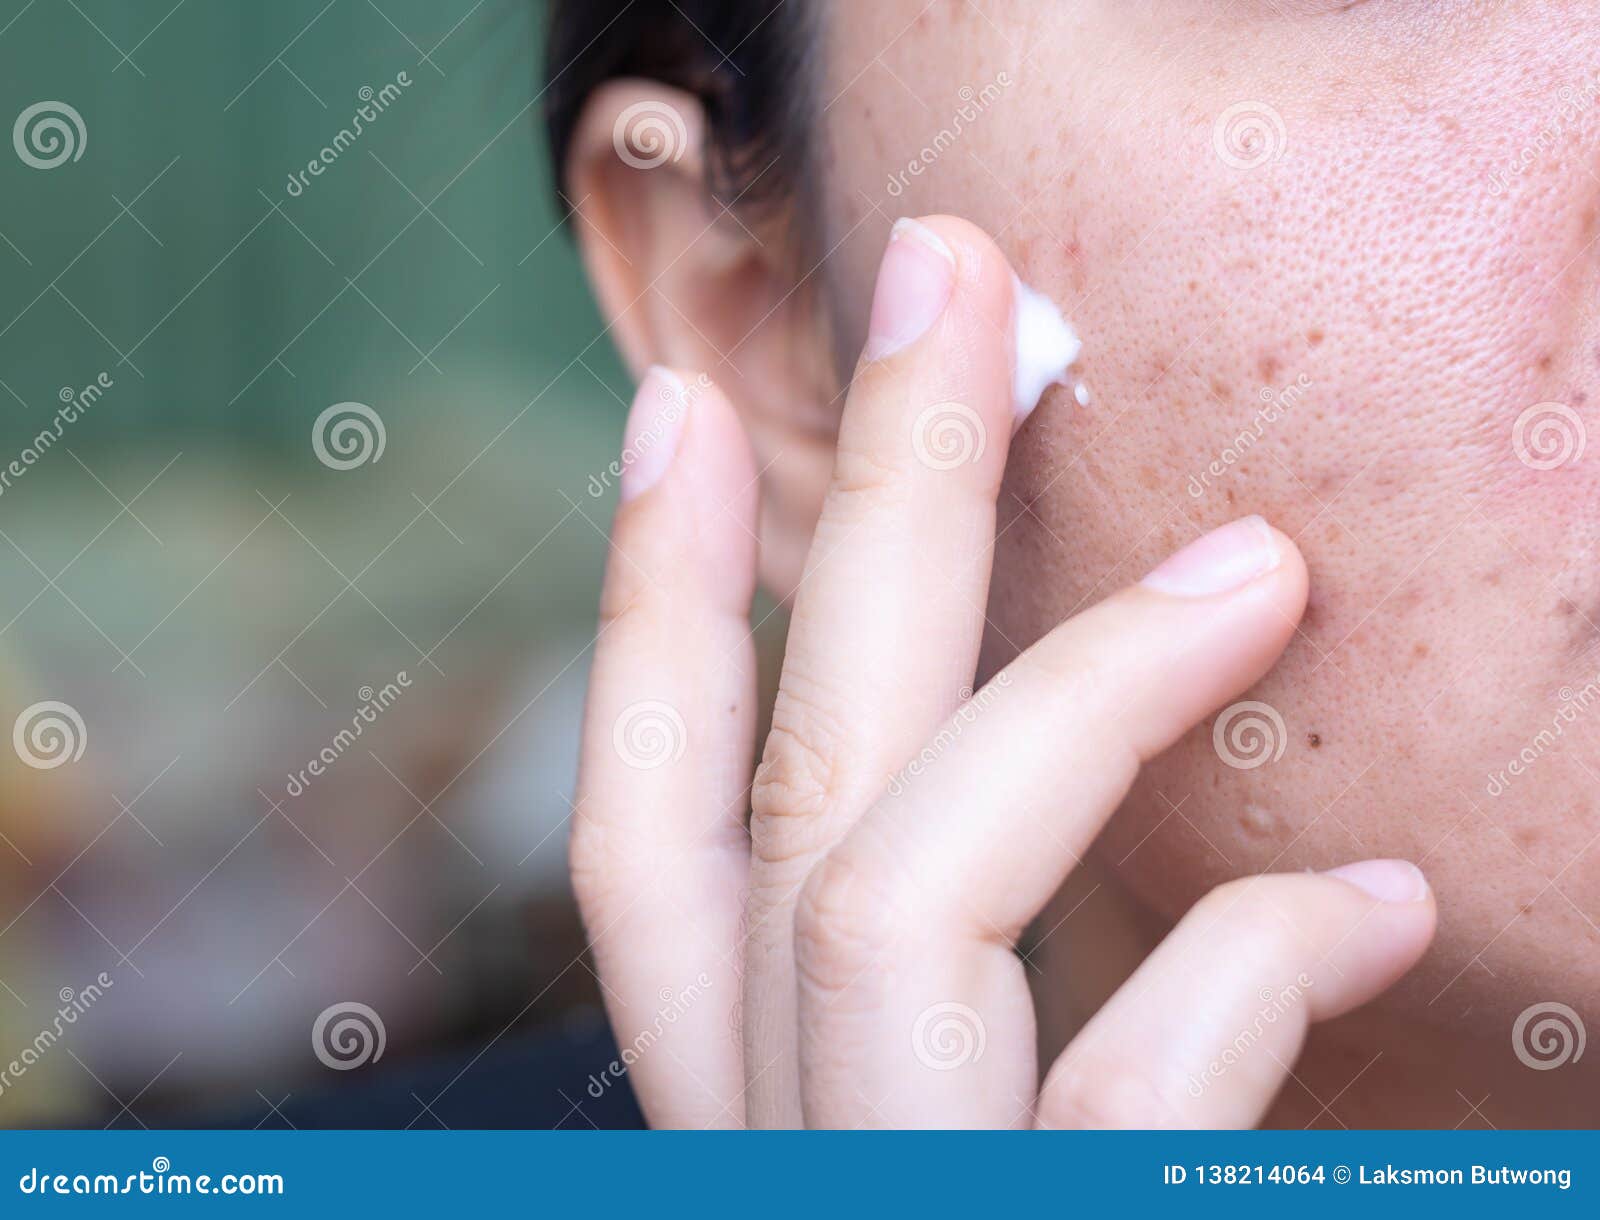 woman applying cream onto face that has problem problematic skin , acne scars ,oily skin and pore, dark spots and blackhead and